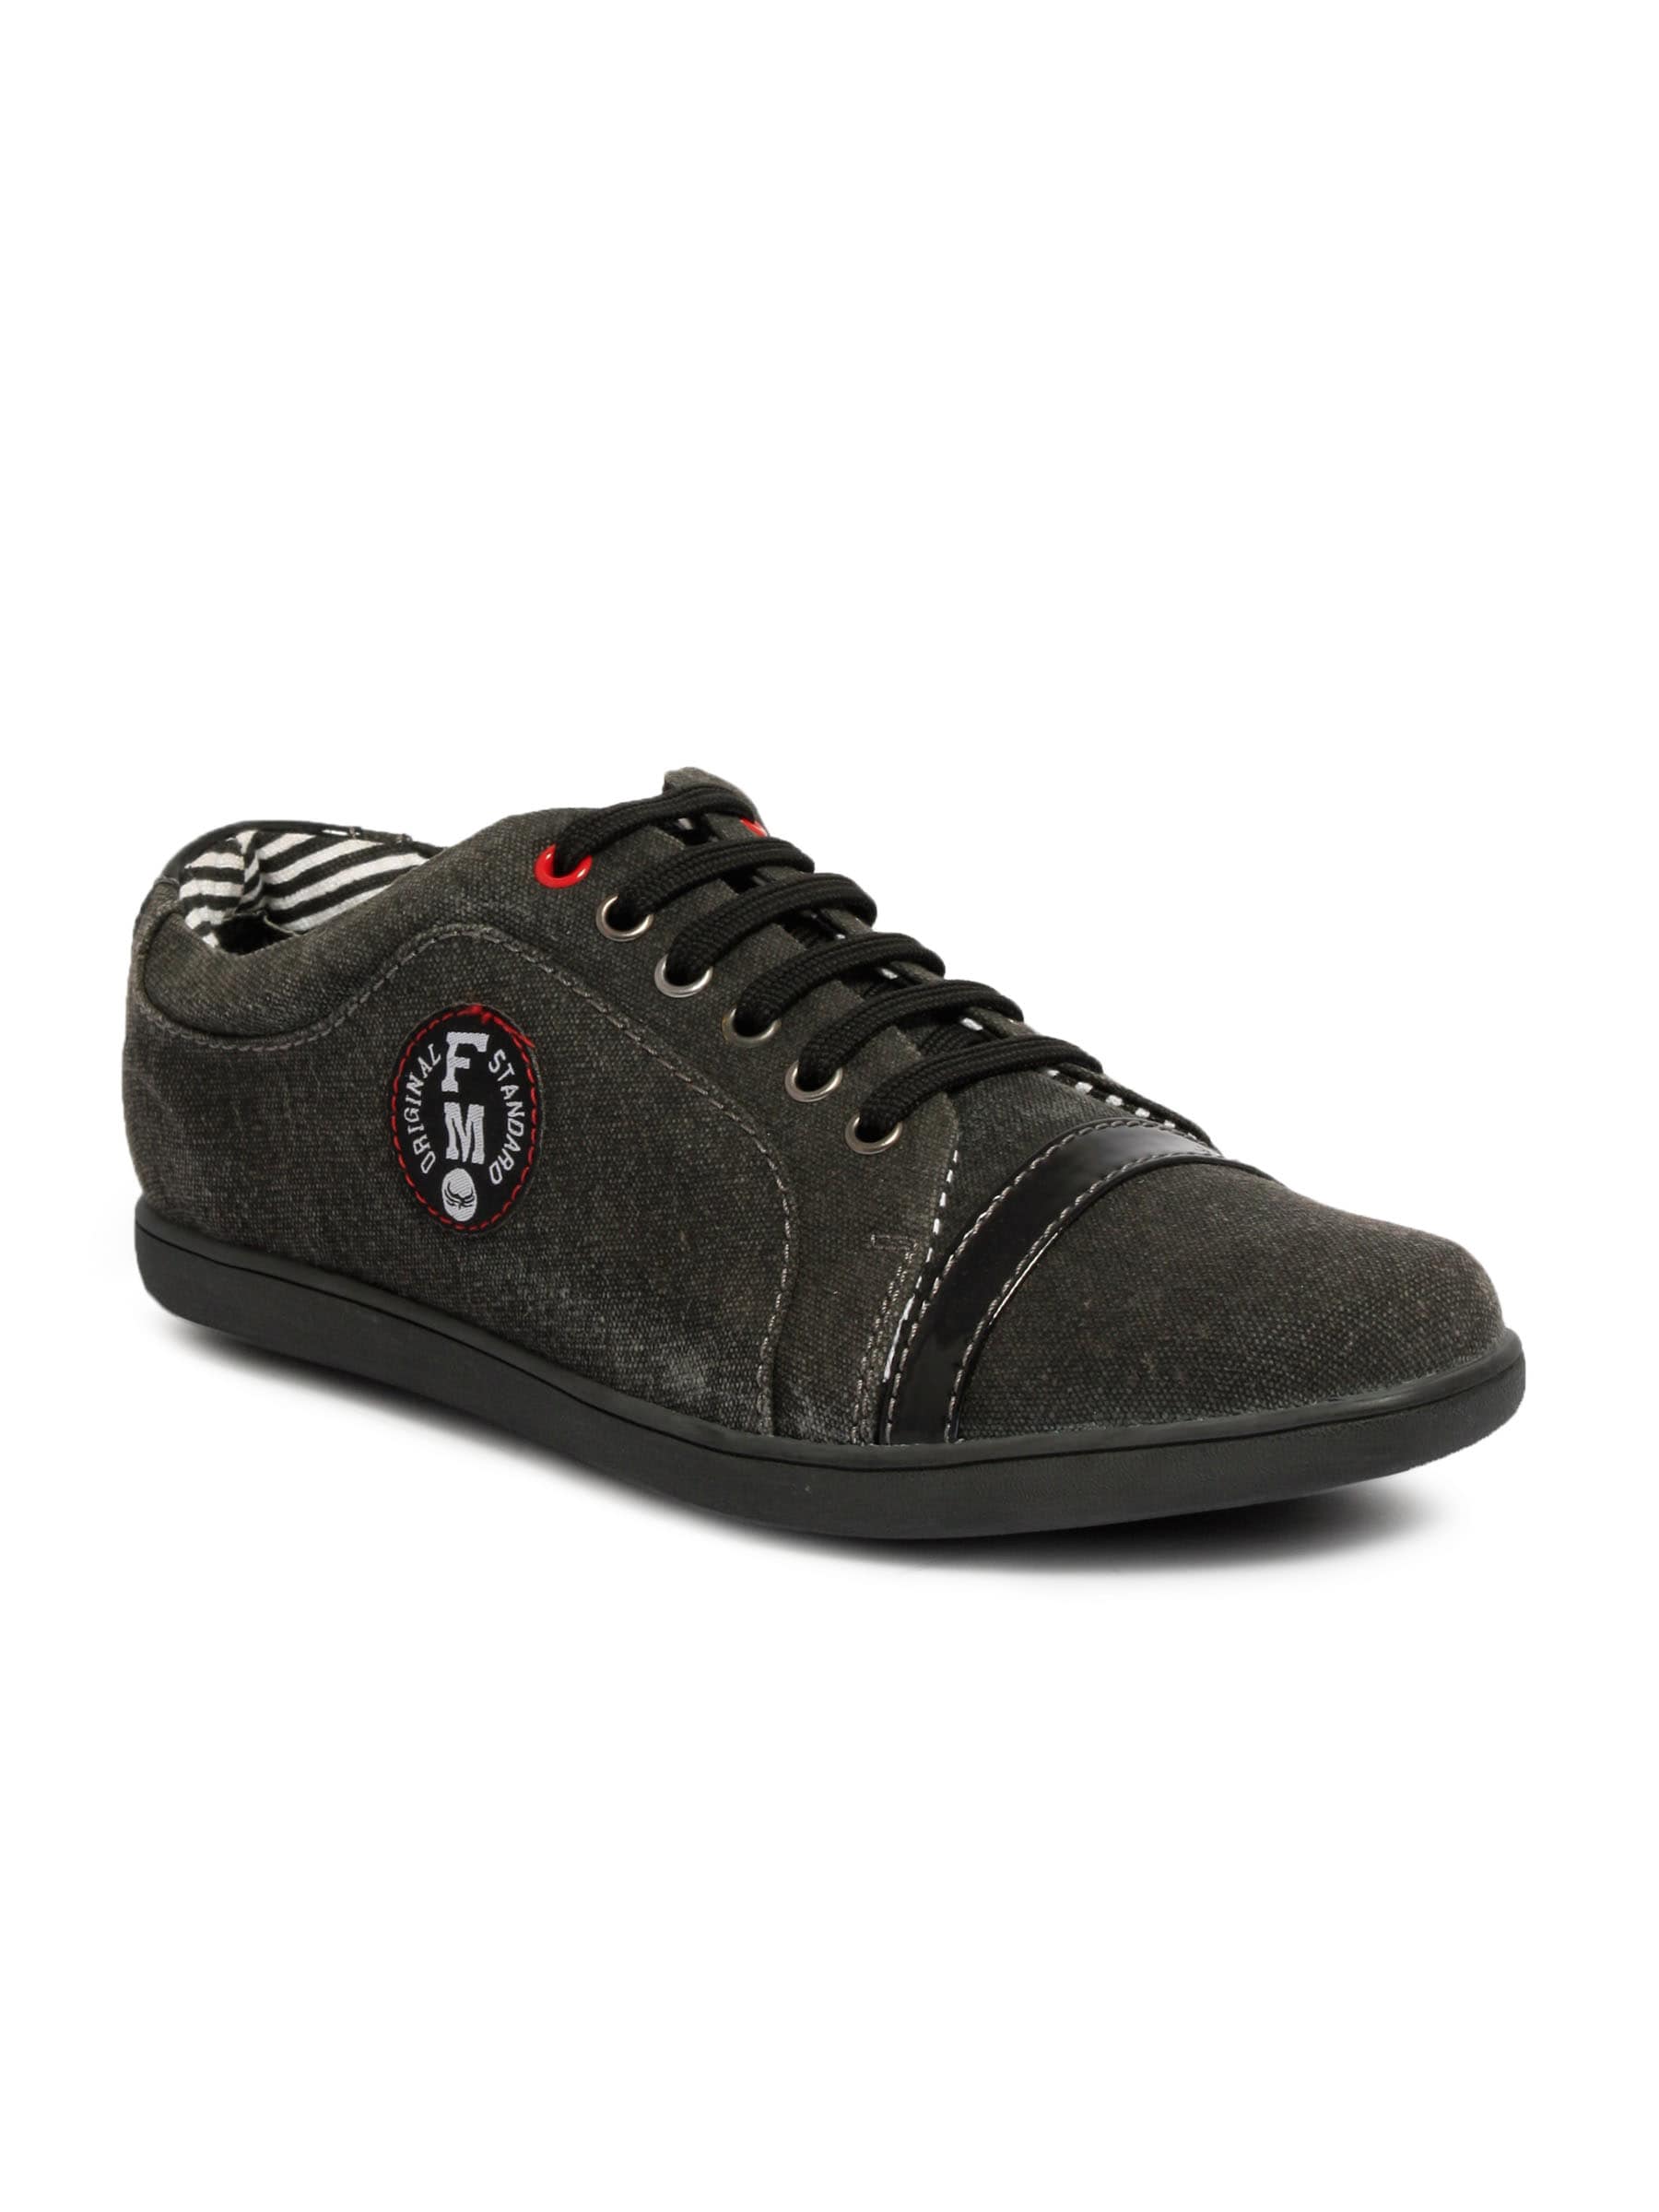 Flying Machine Men Casual Black Casual Shoes